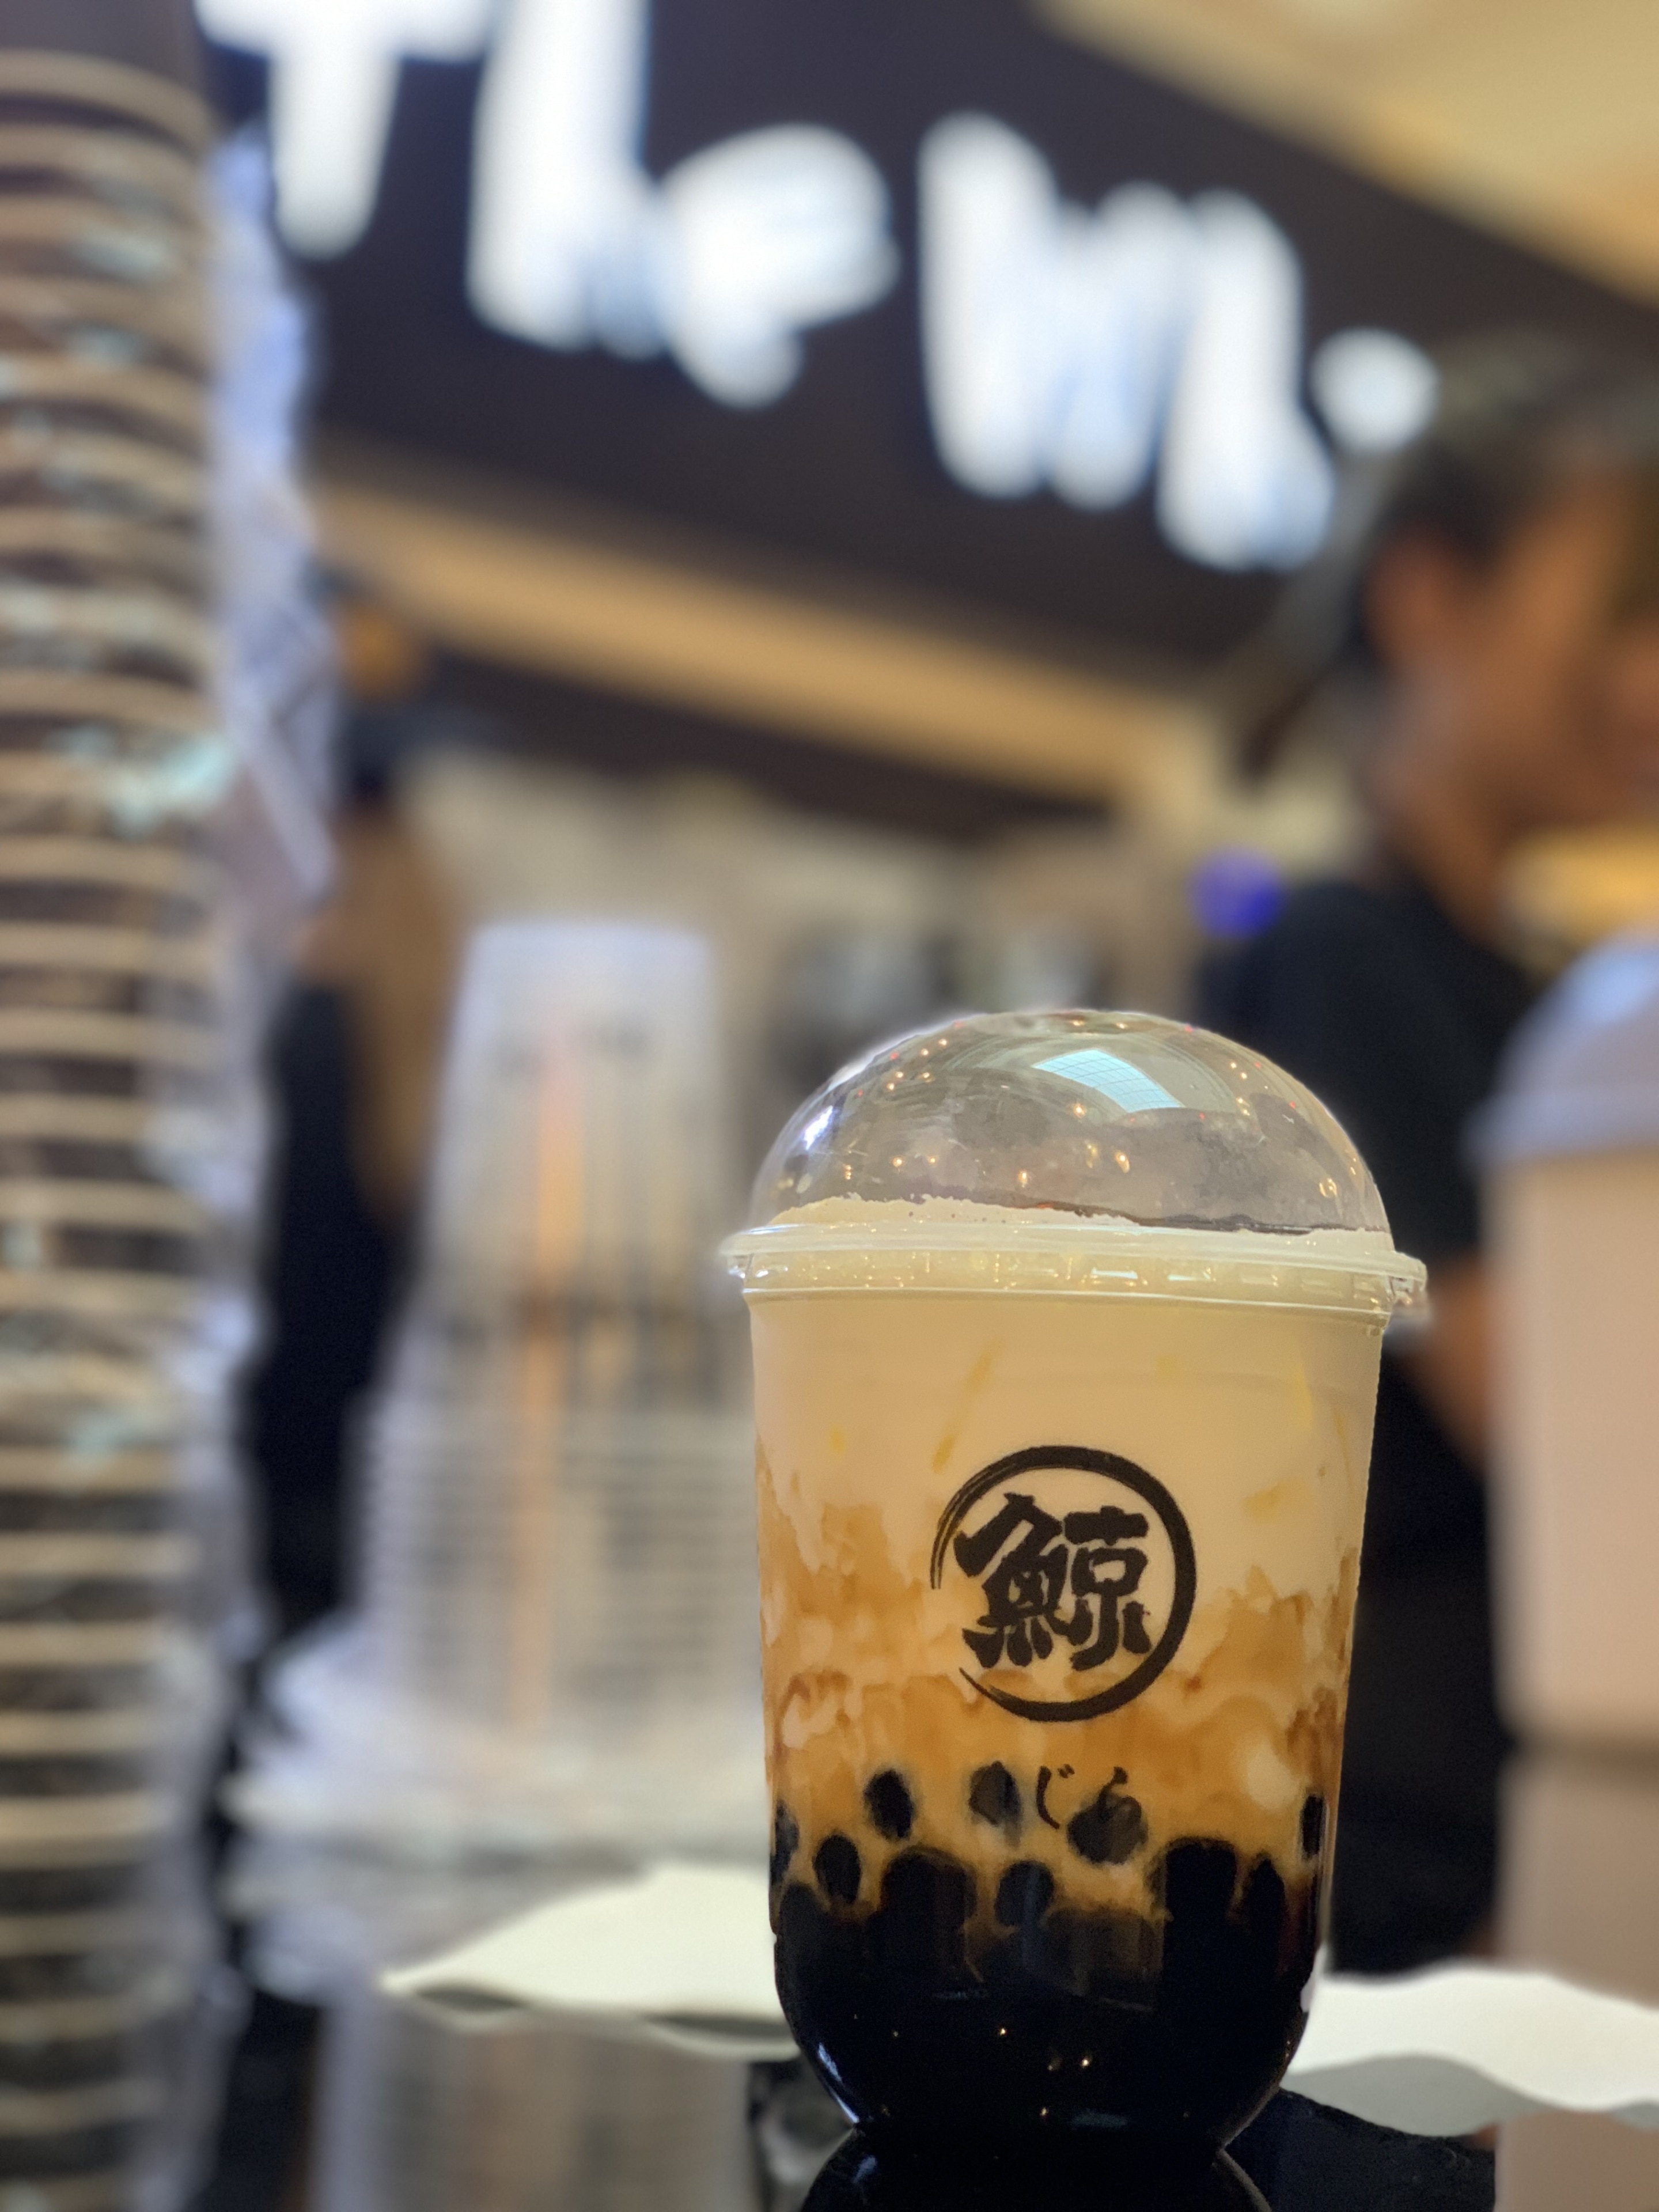 This year is the Boba Milk Tea year I guess? They popped out in every corner possible. Can’t help but to try one. #boba #milktea #culture